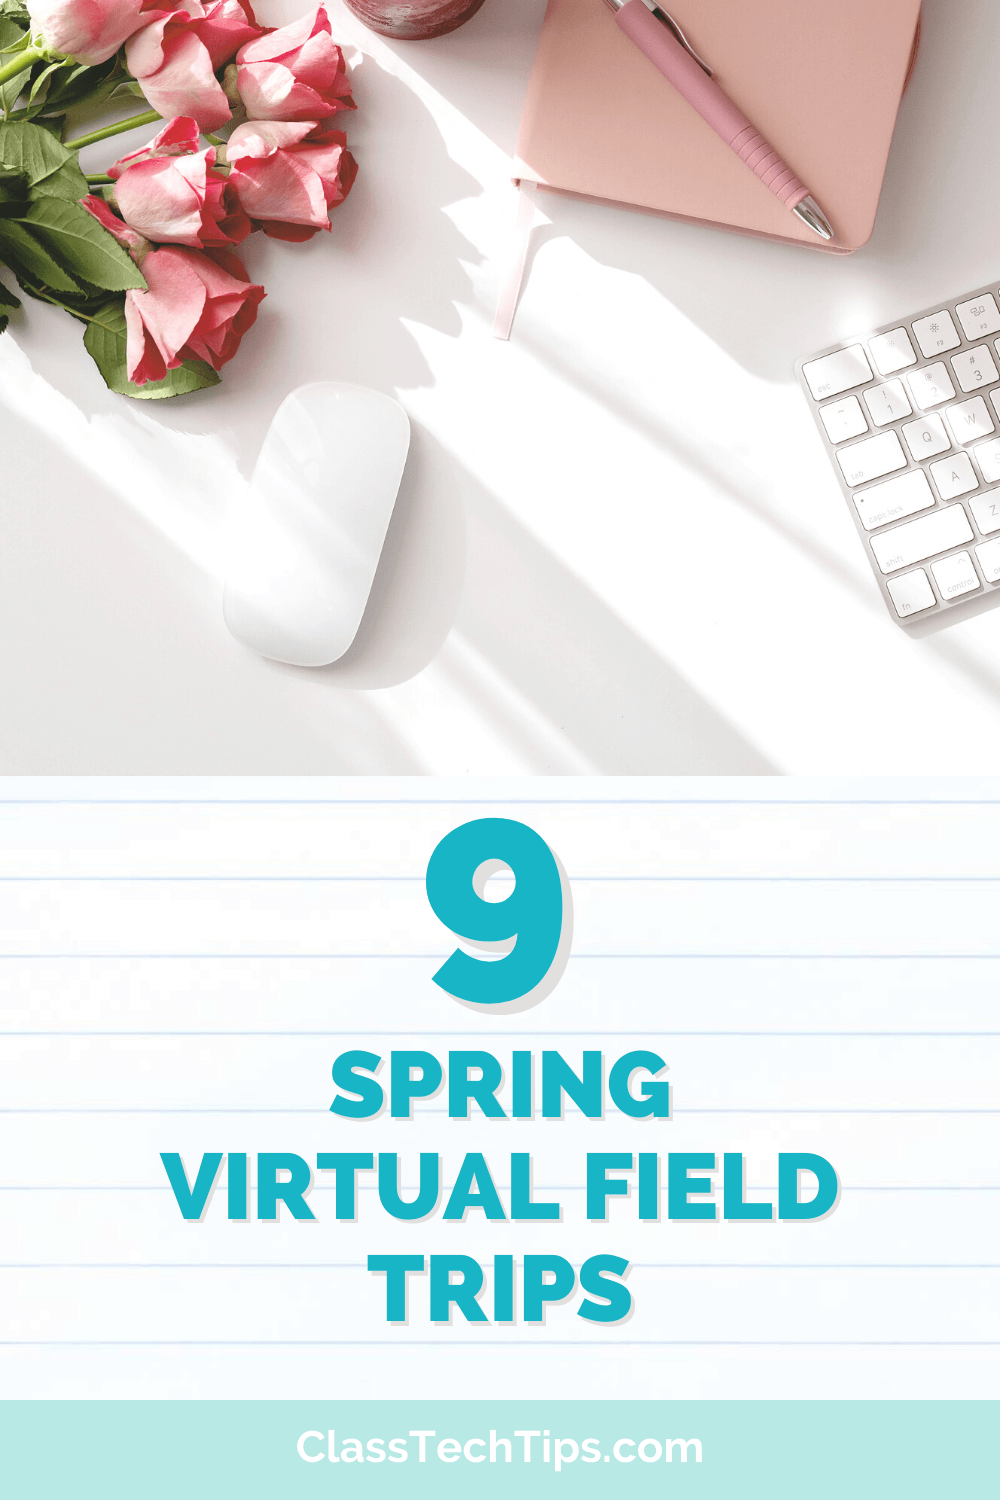 A promotional graphic for '9 Spring Virtual Field Trips' from ClassTechTips.com. The image features a neatly arranged desk with pink roses, a pink notebook with a pen, a white mouse, and a keyboard on a white background.